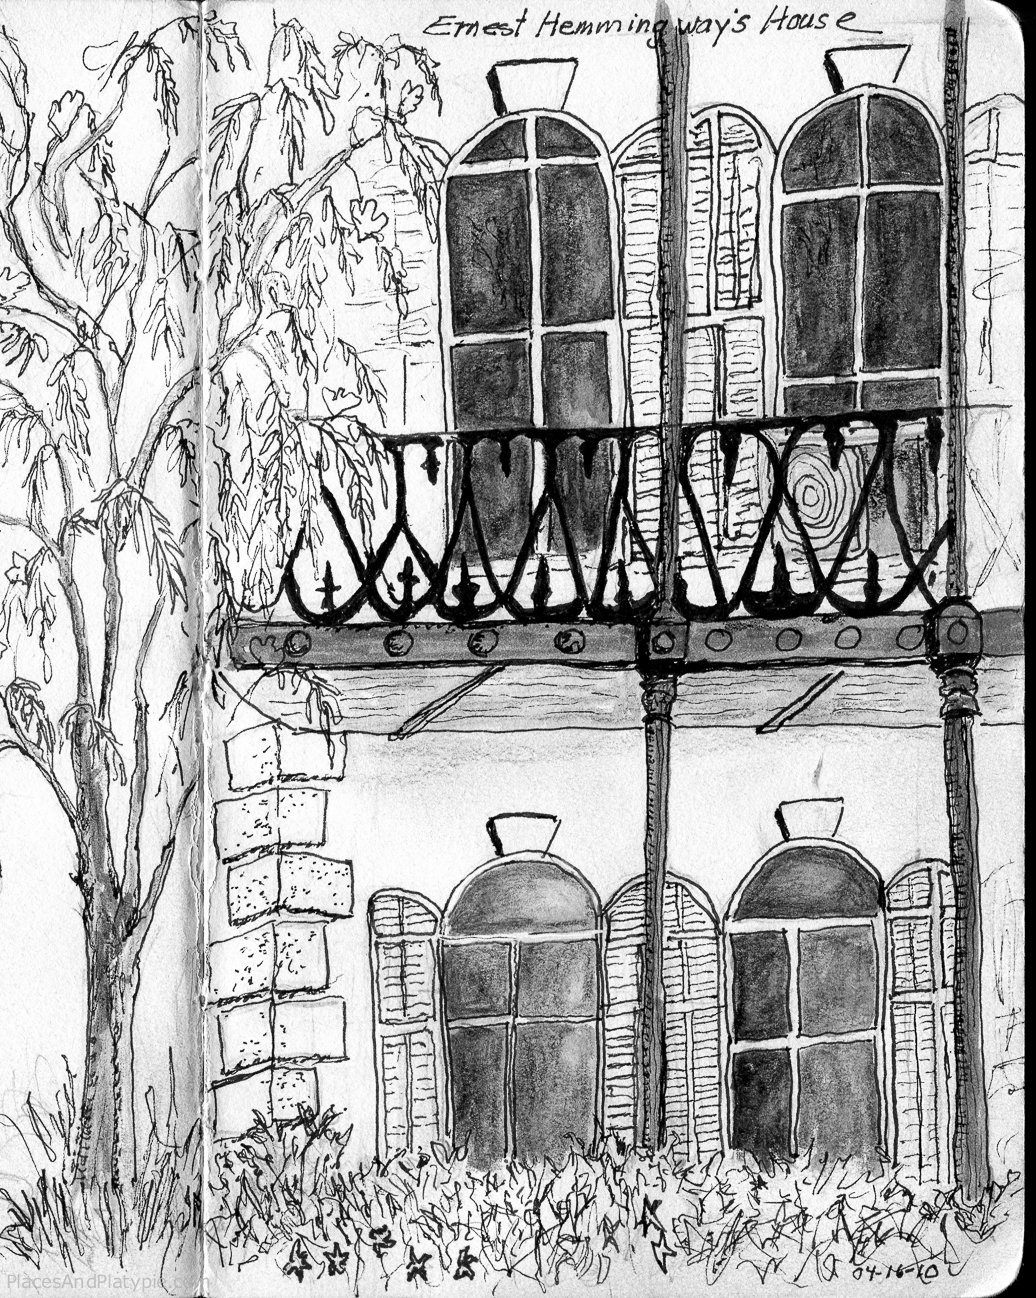 Where Ernest's six-toed cats still live. Micron and Sumi ink.